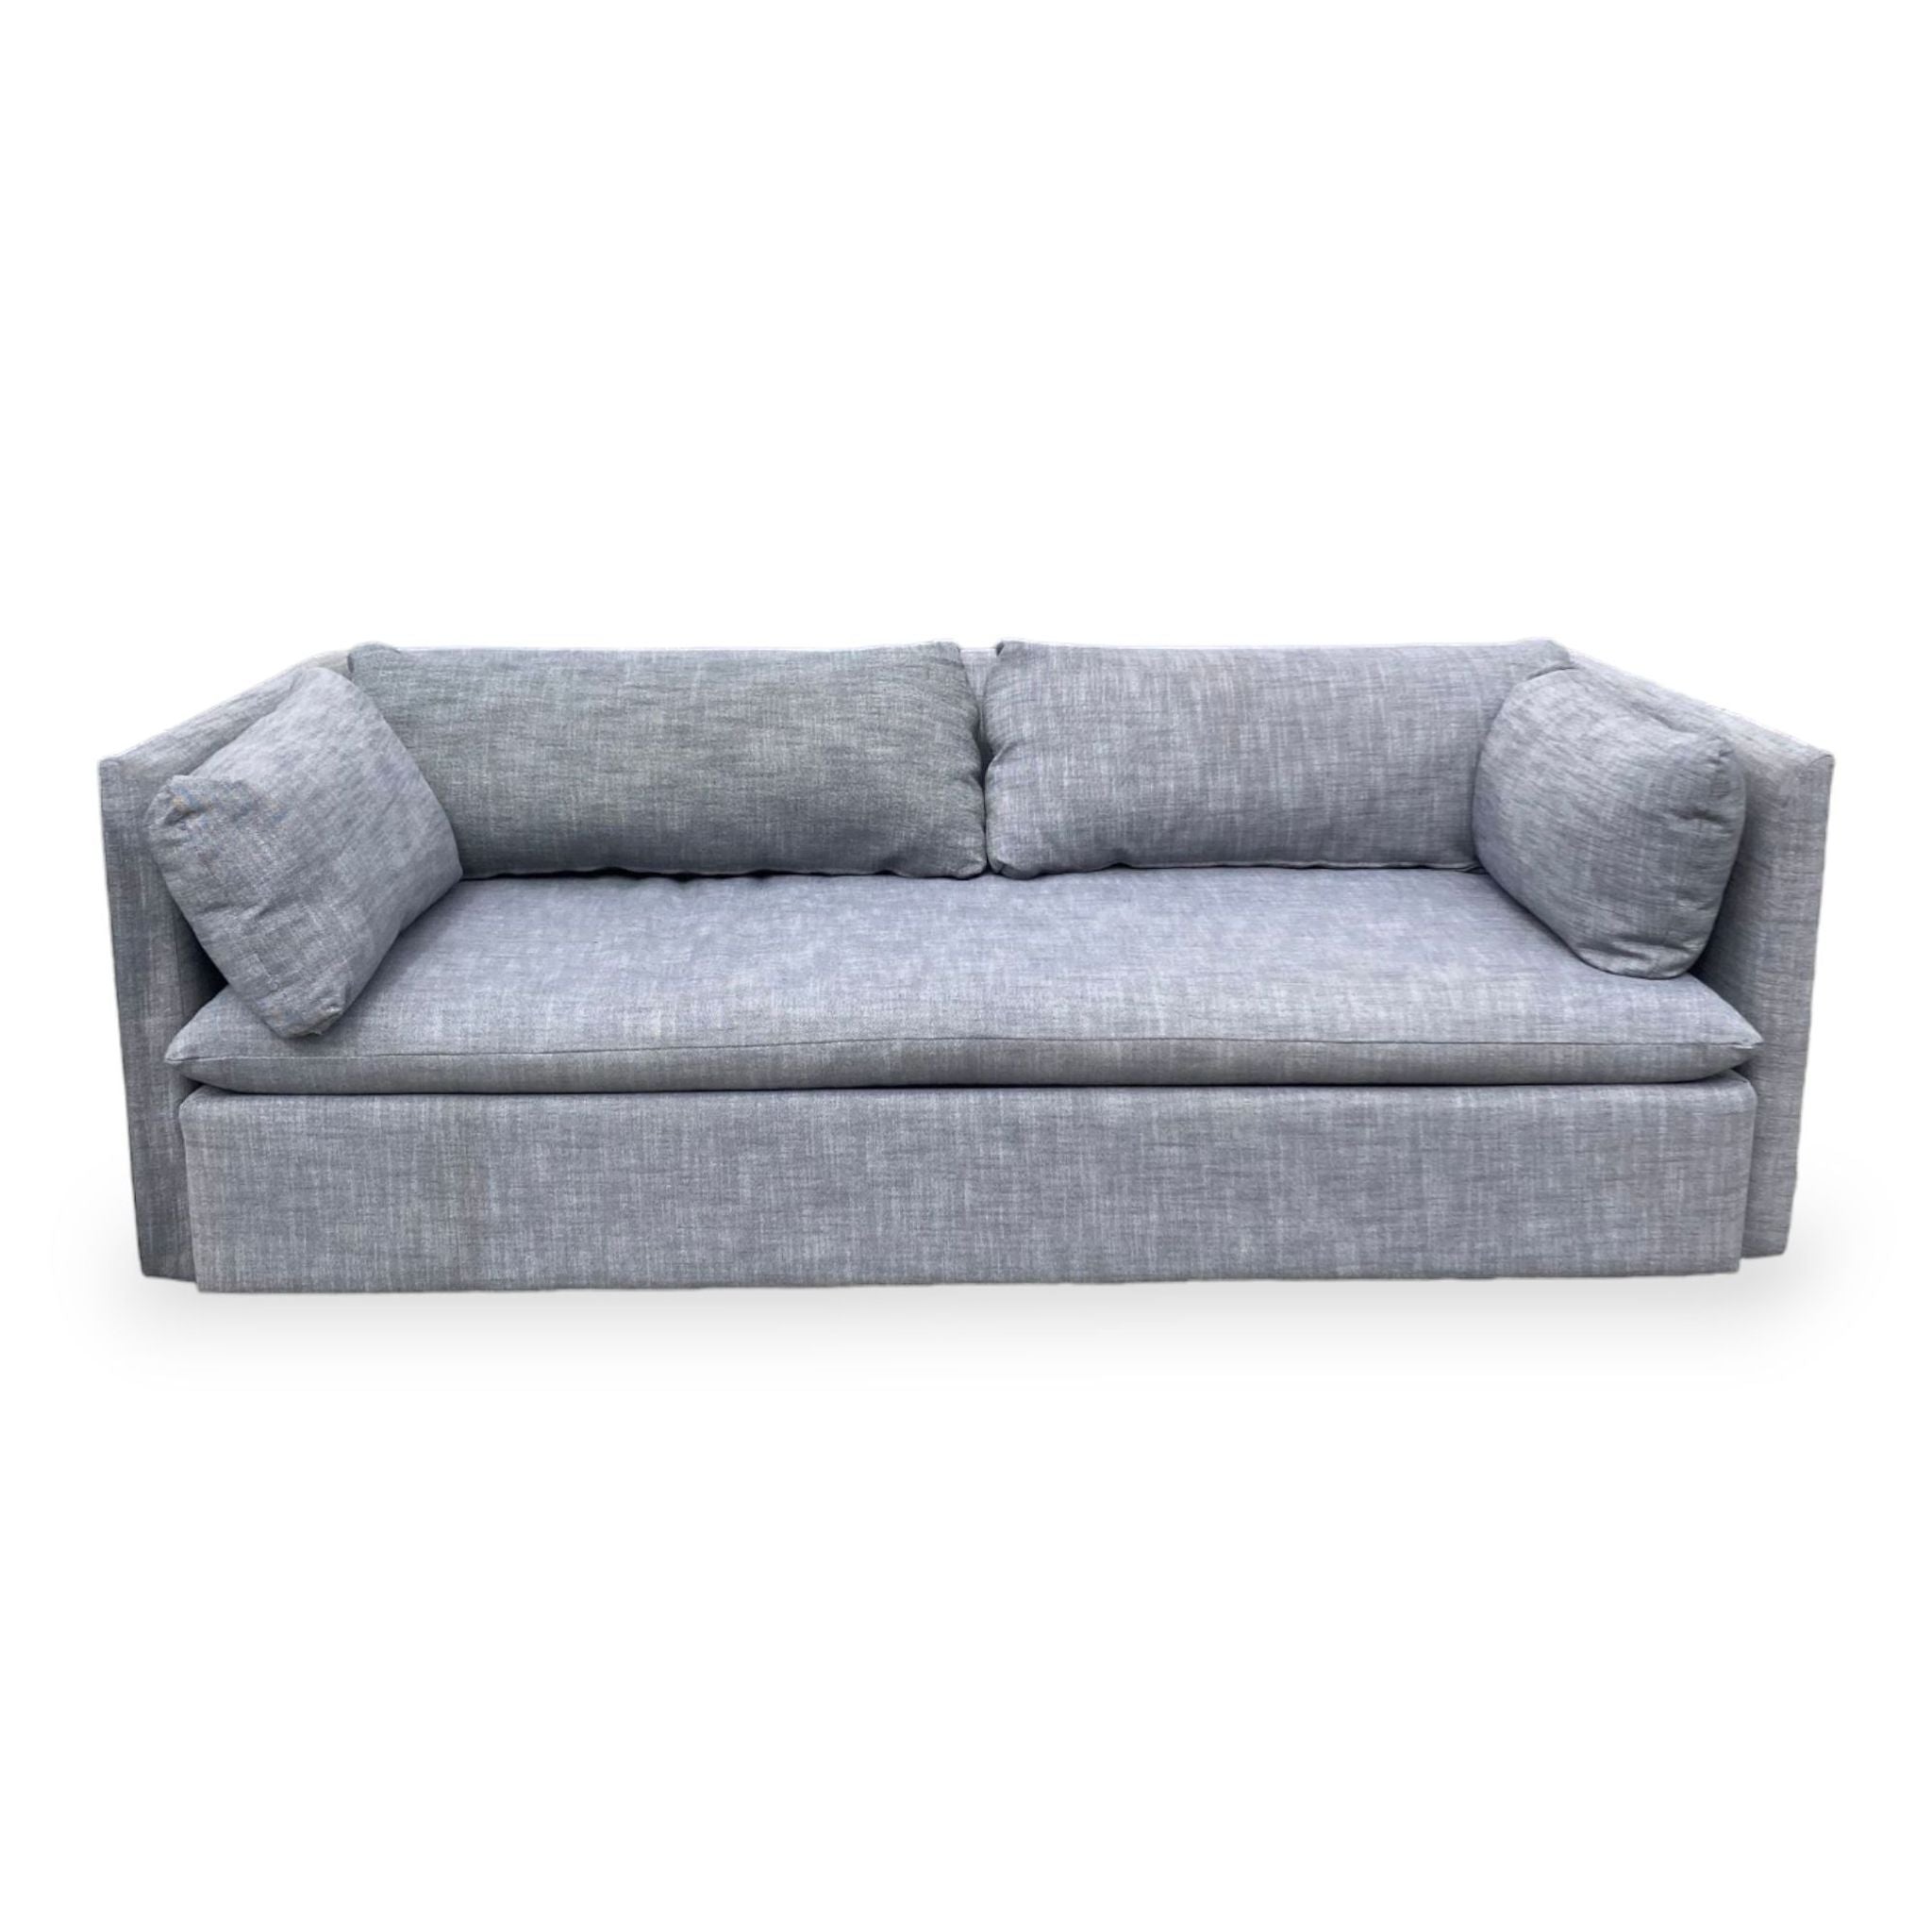 West Elm 3-seat sofa with linen weave, clean lines, shelter arms, and side pillows on a white background.